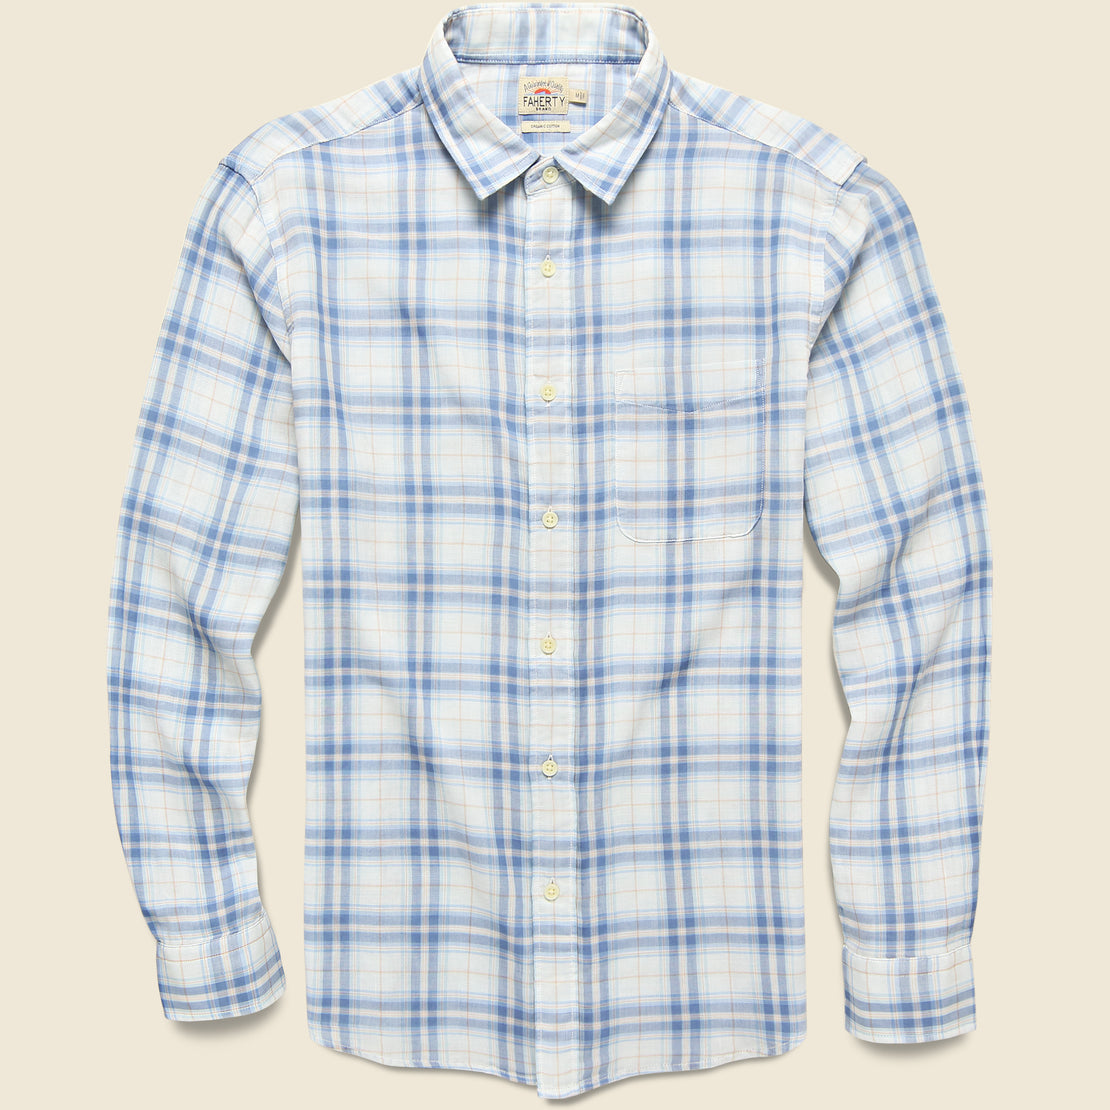 Faherty The Chill Doublecloth Shirt - Beach House Plaid